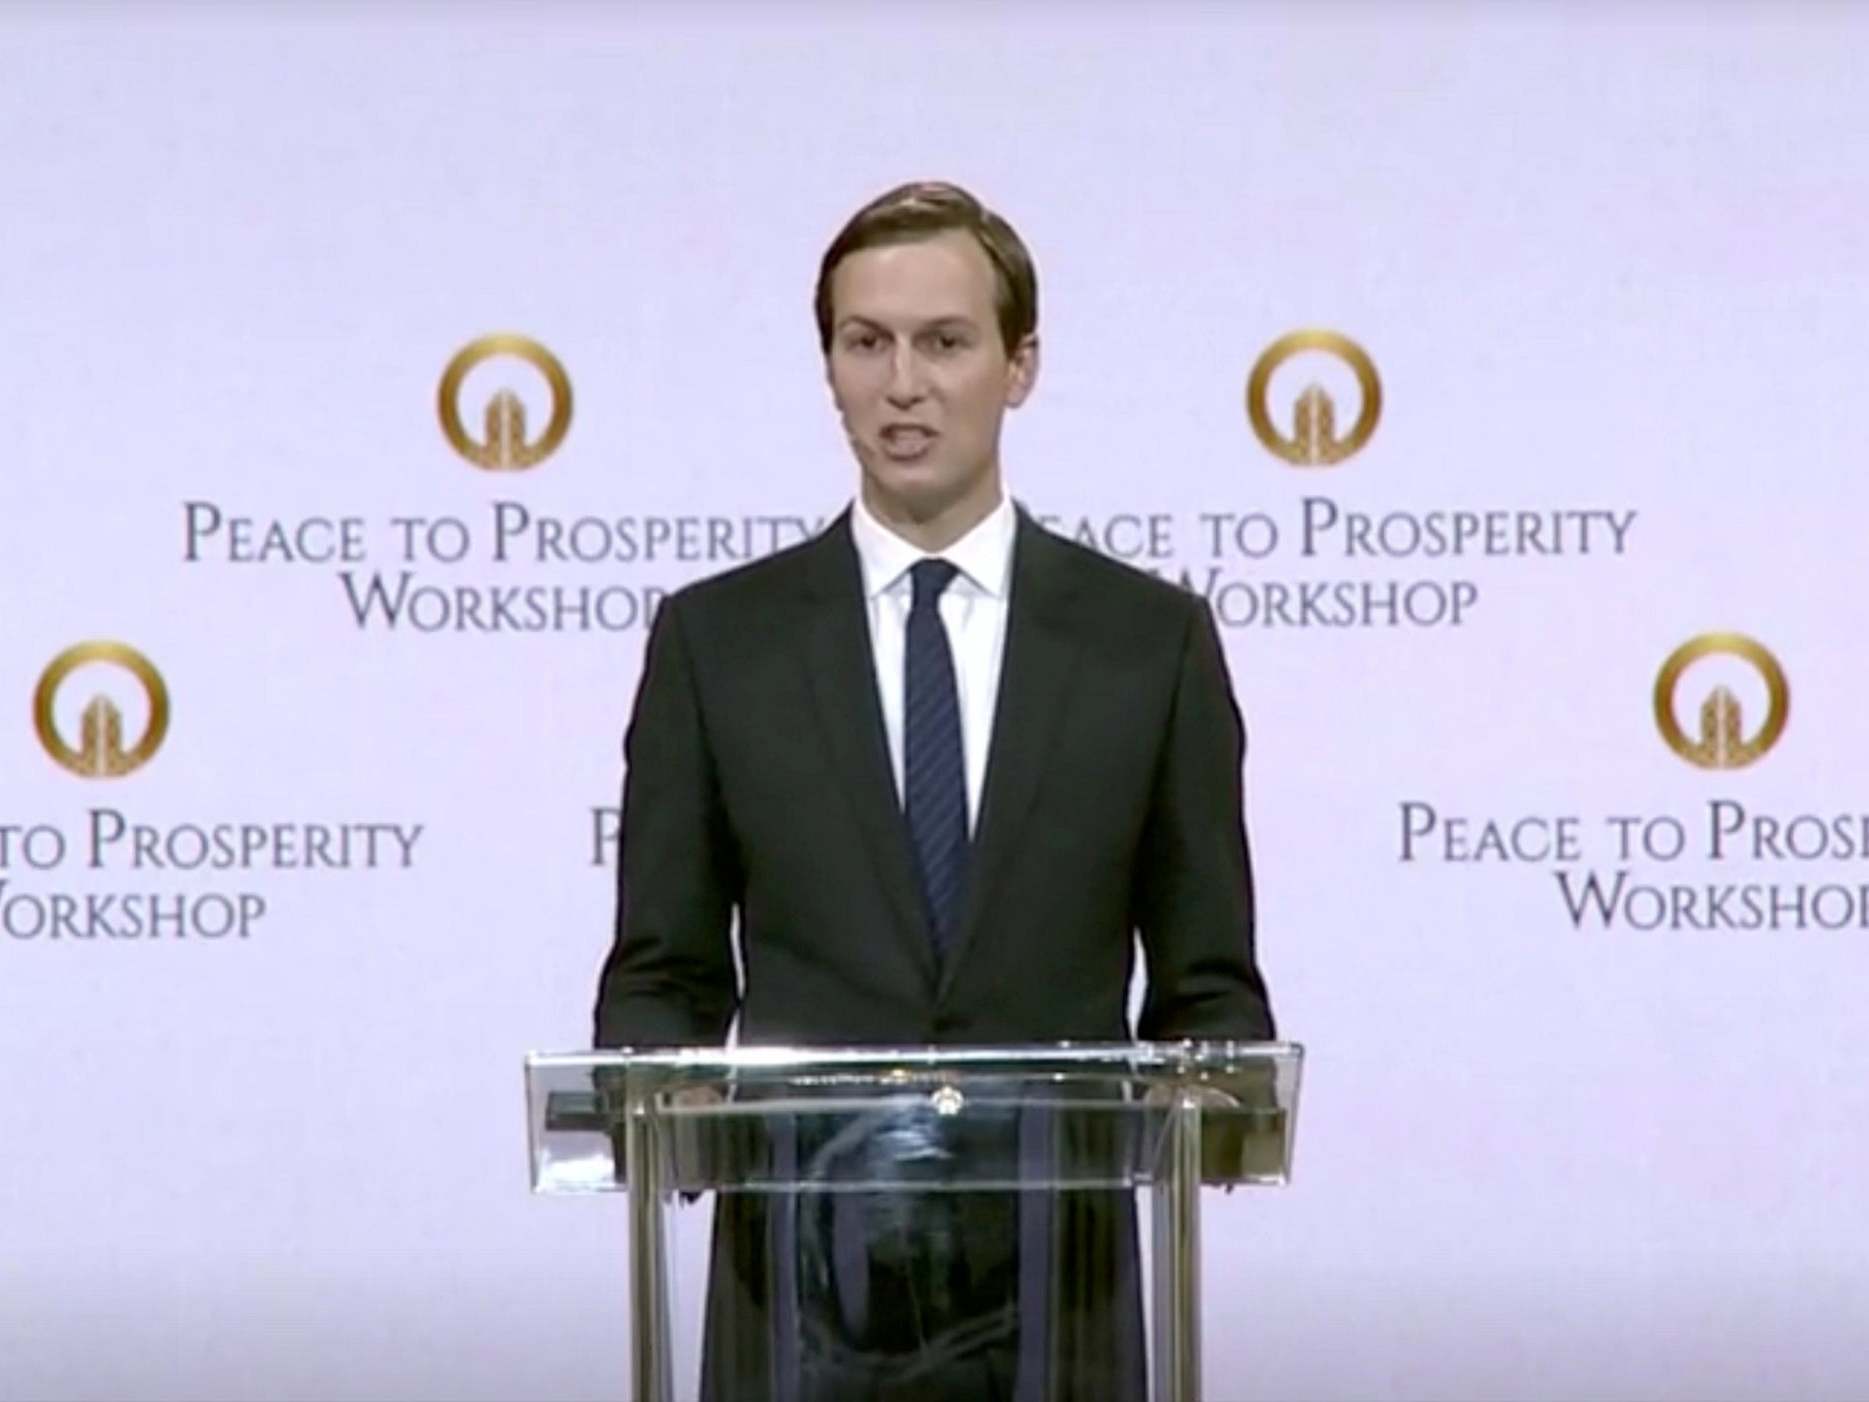 Jared Kushner calls Trump's peace plan 'opportunity of the century' at Bahrain summit boycotted by Palestinians